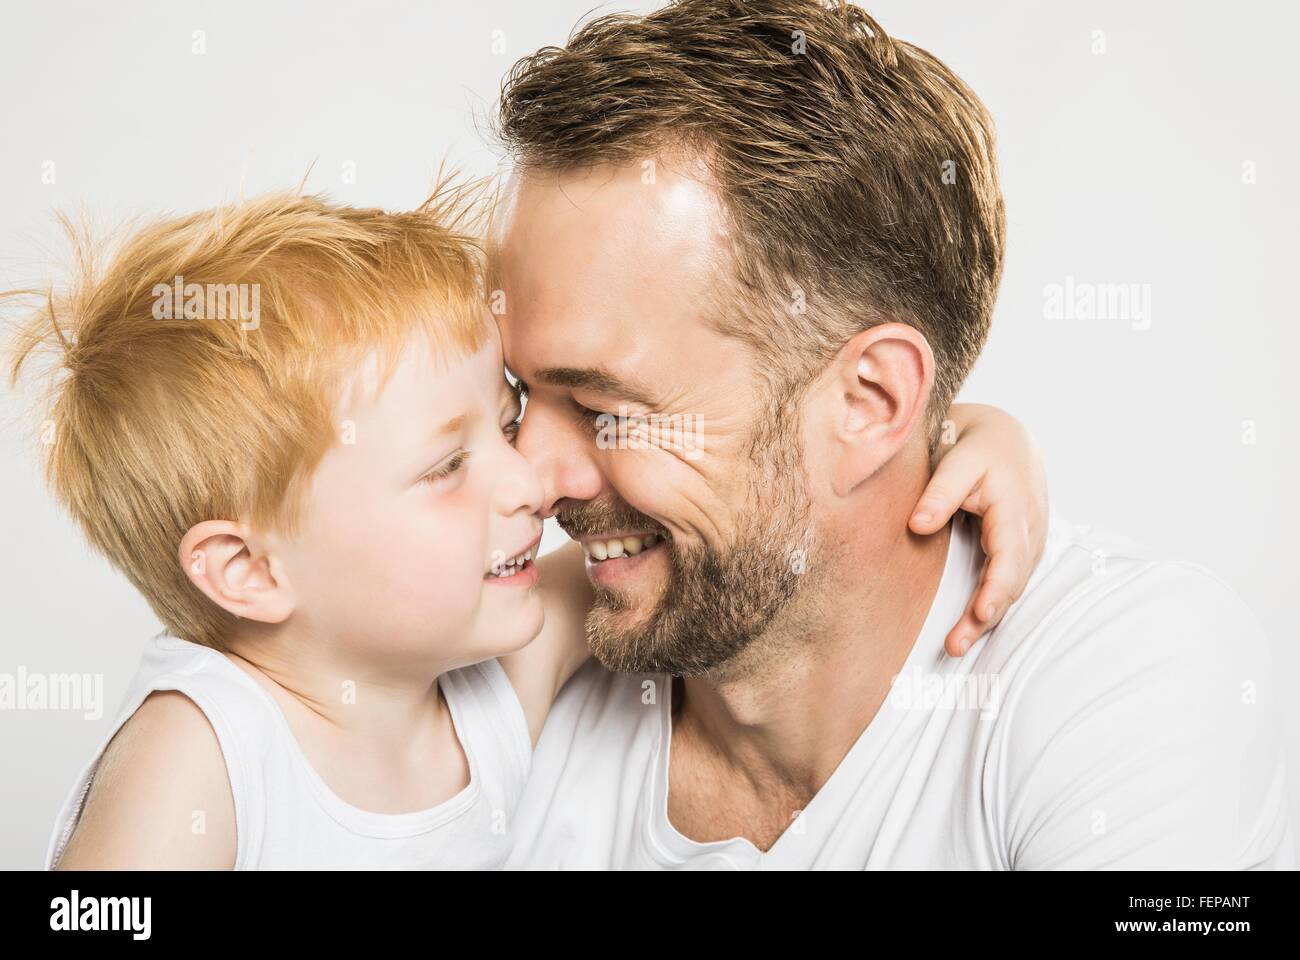 Studio portrait of mature man face to face with son Stock Photo